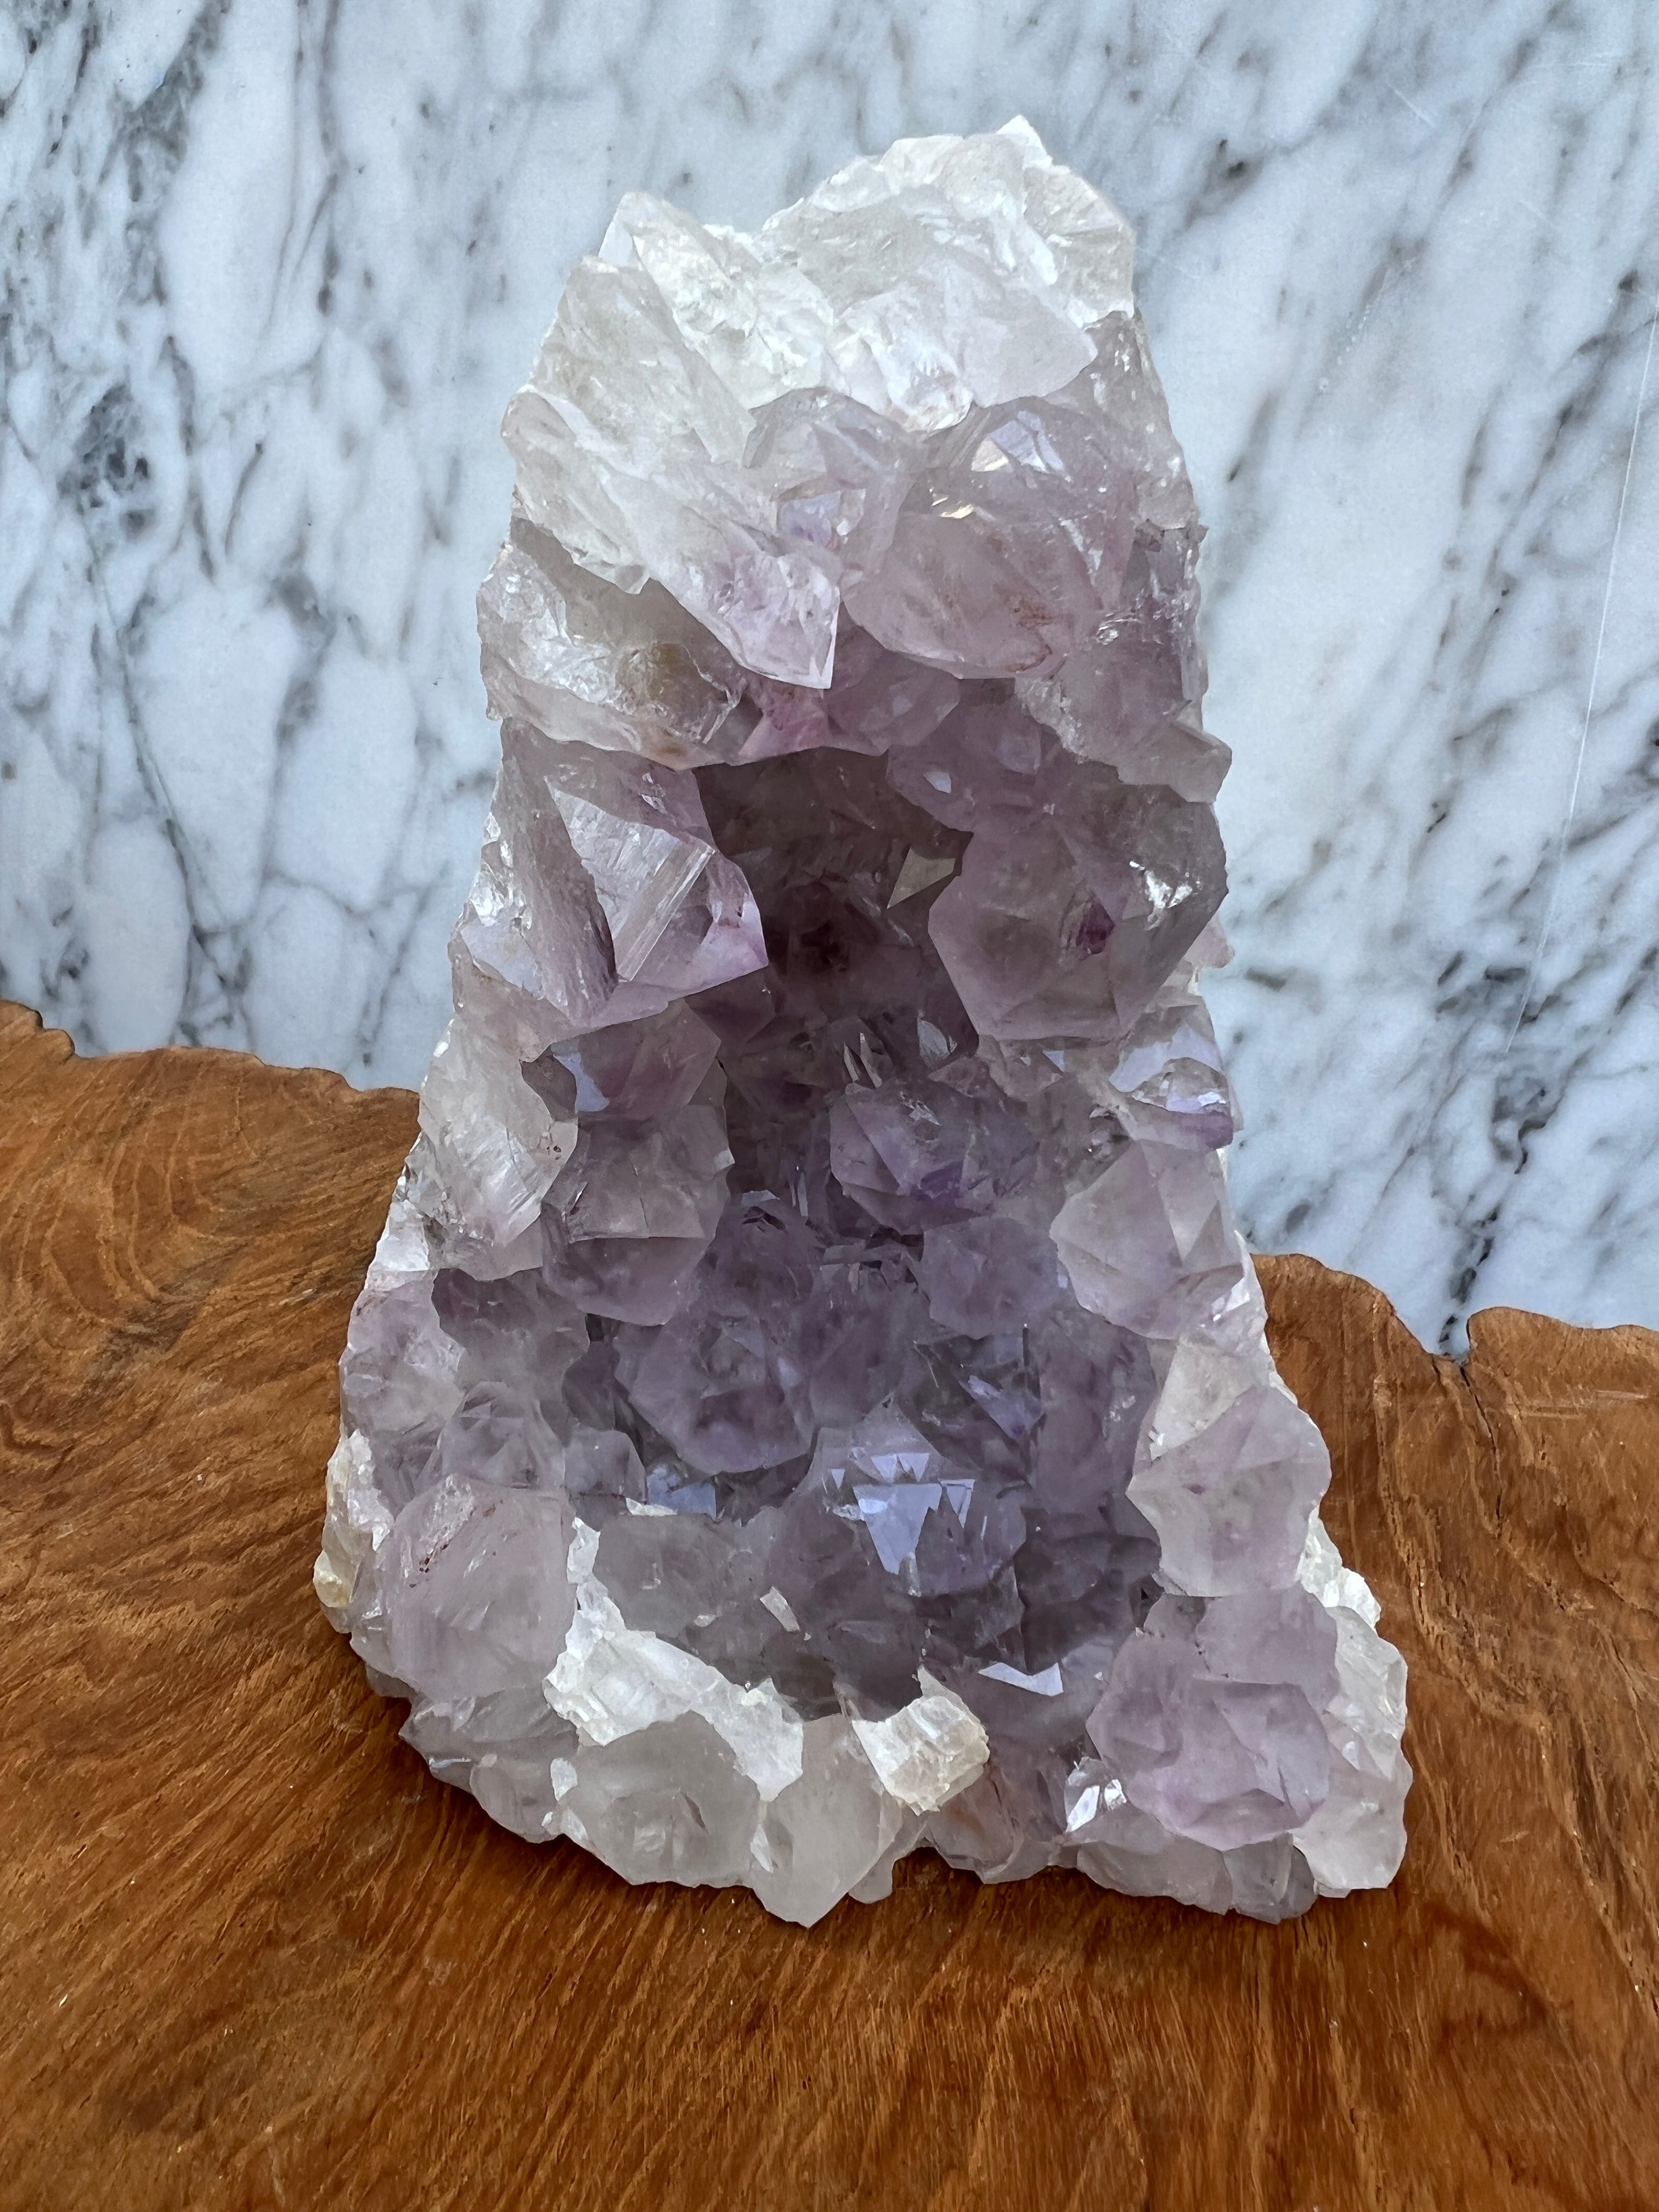 Not specified Crystals 15cm Amethyst Druze 15cm